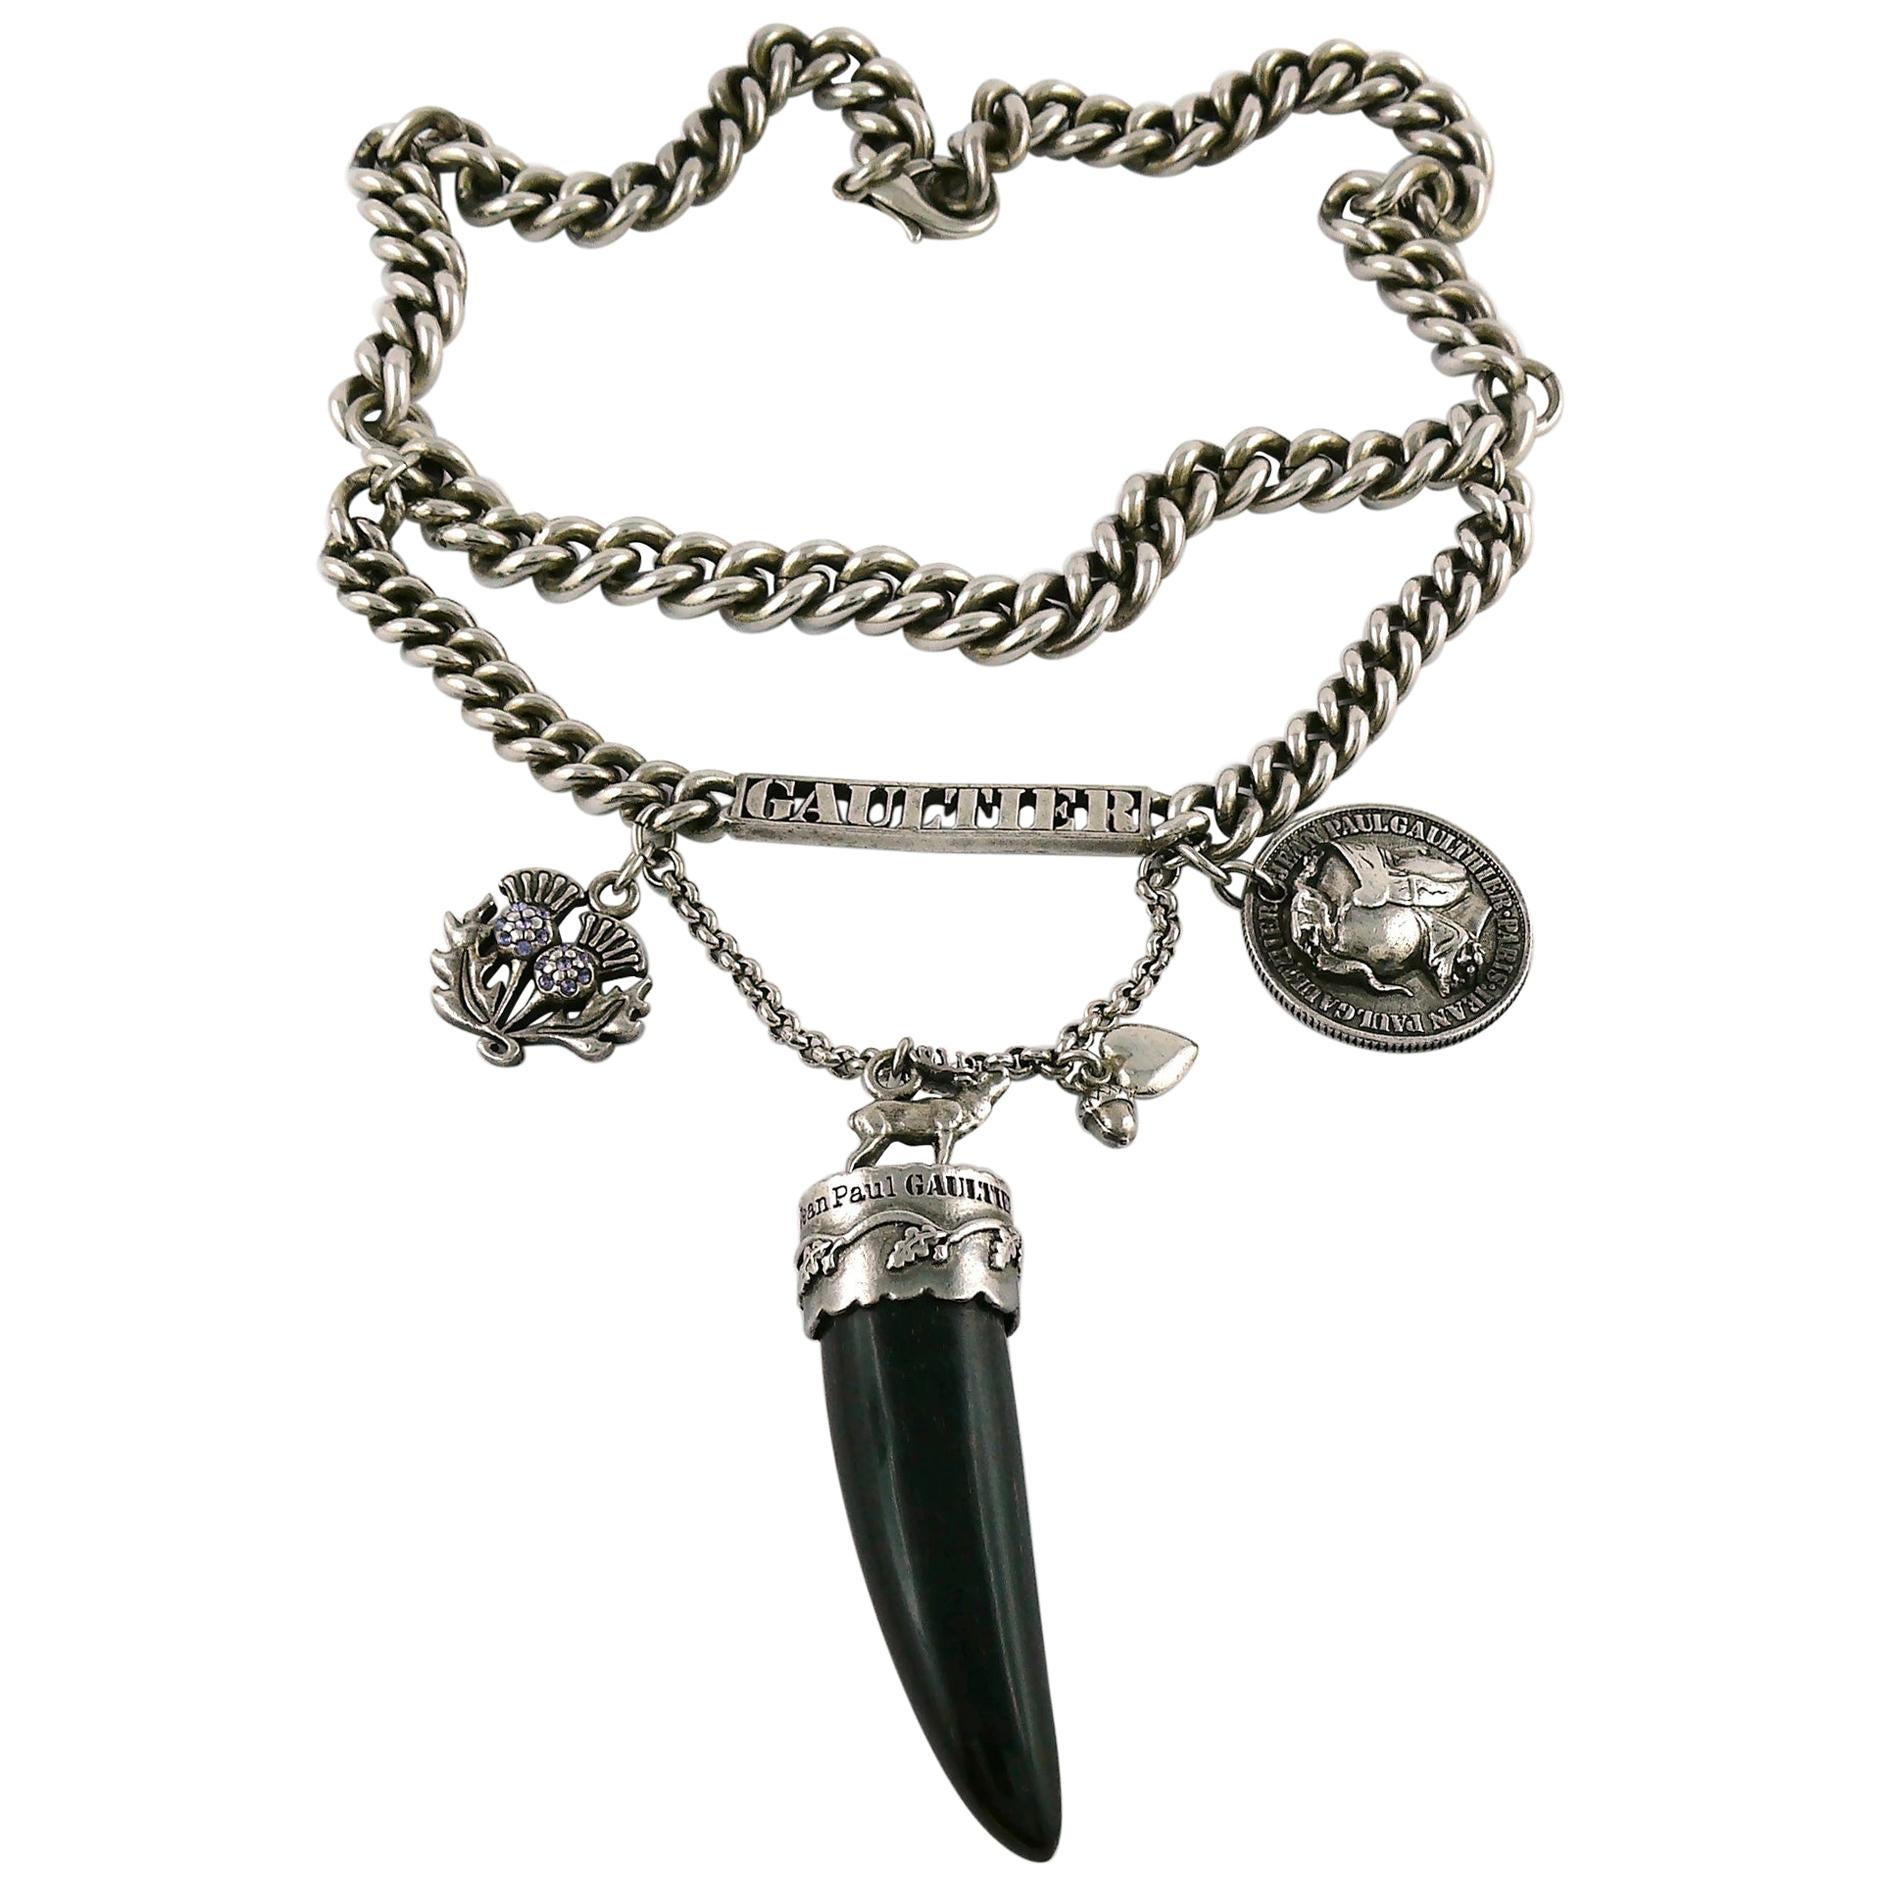 Jean Paul Gaultier Silver Toned Curb Chain Charm Necklace